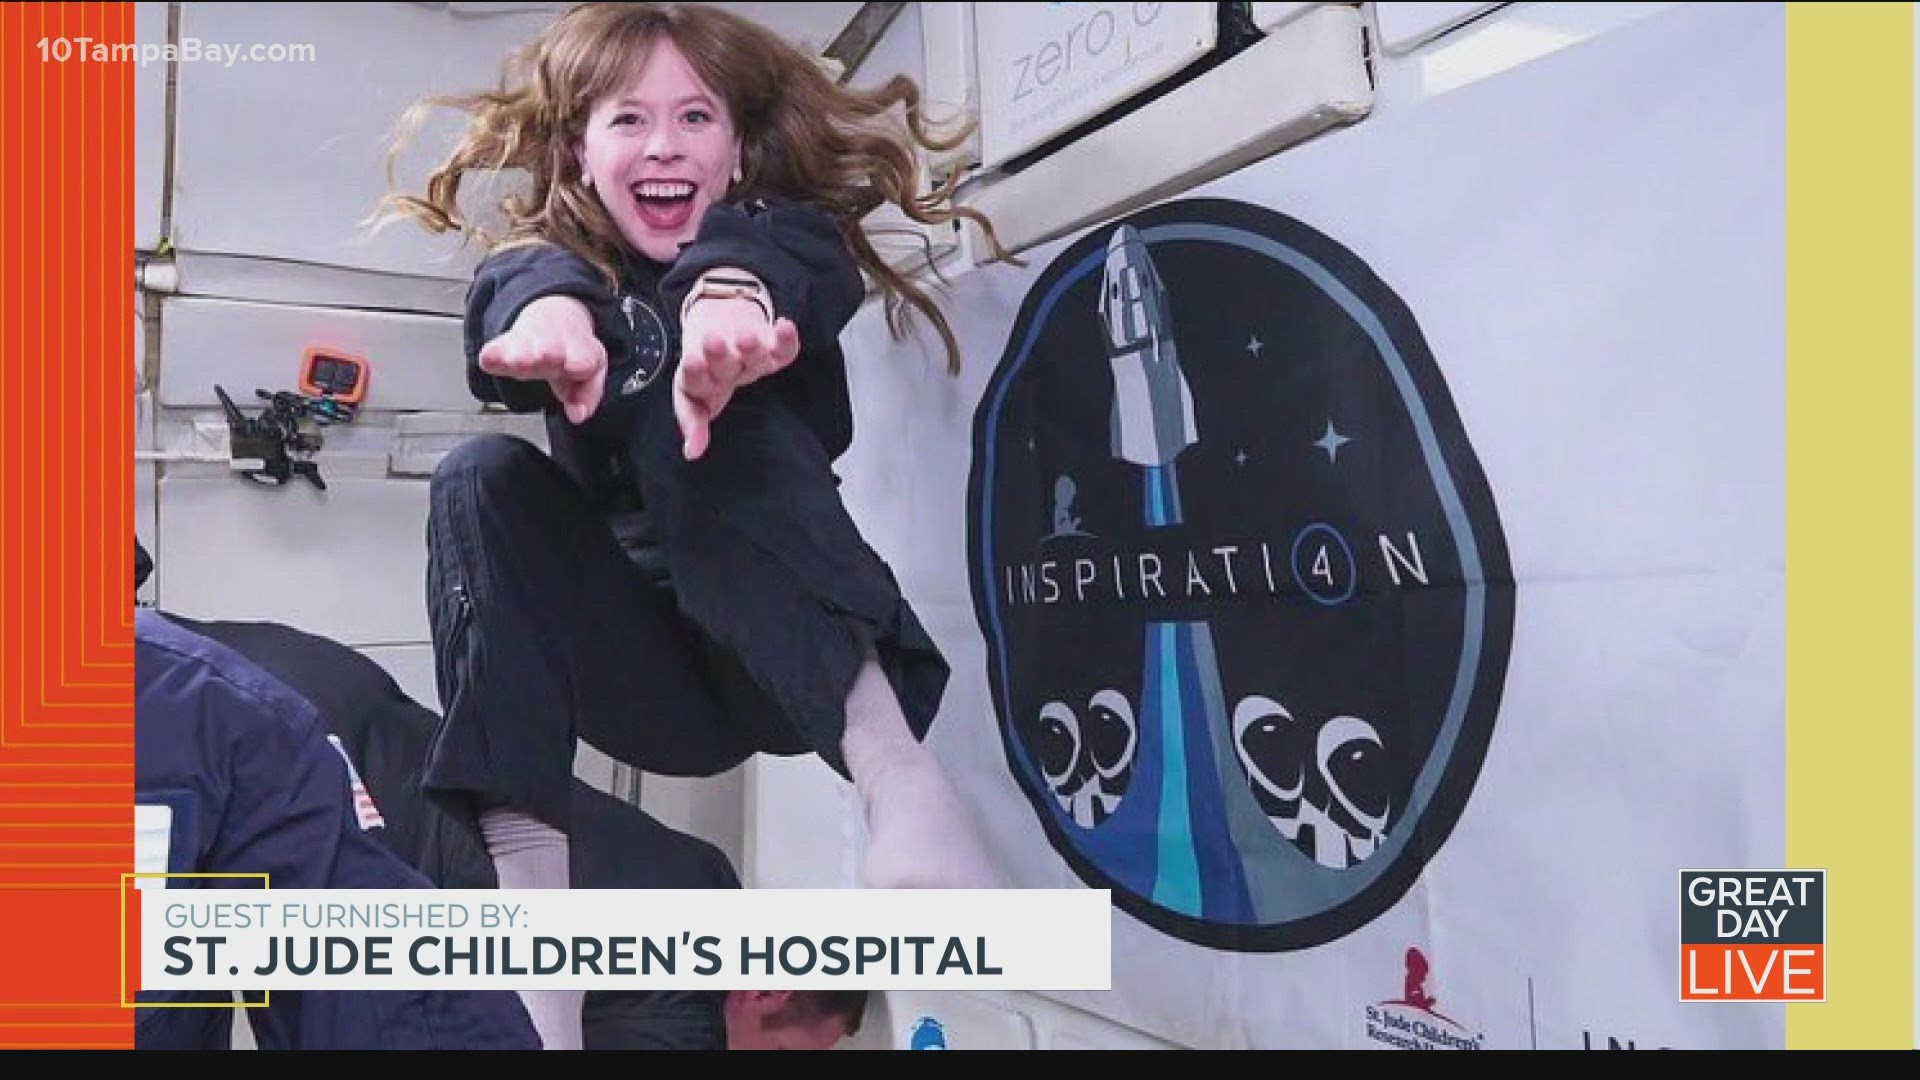 Bone cancer survivor to become youngest American in space